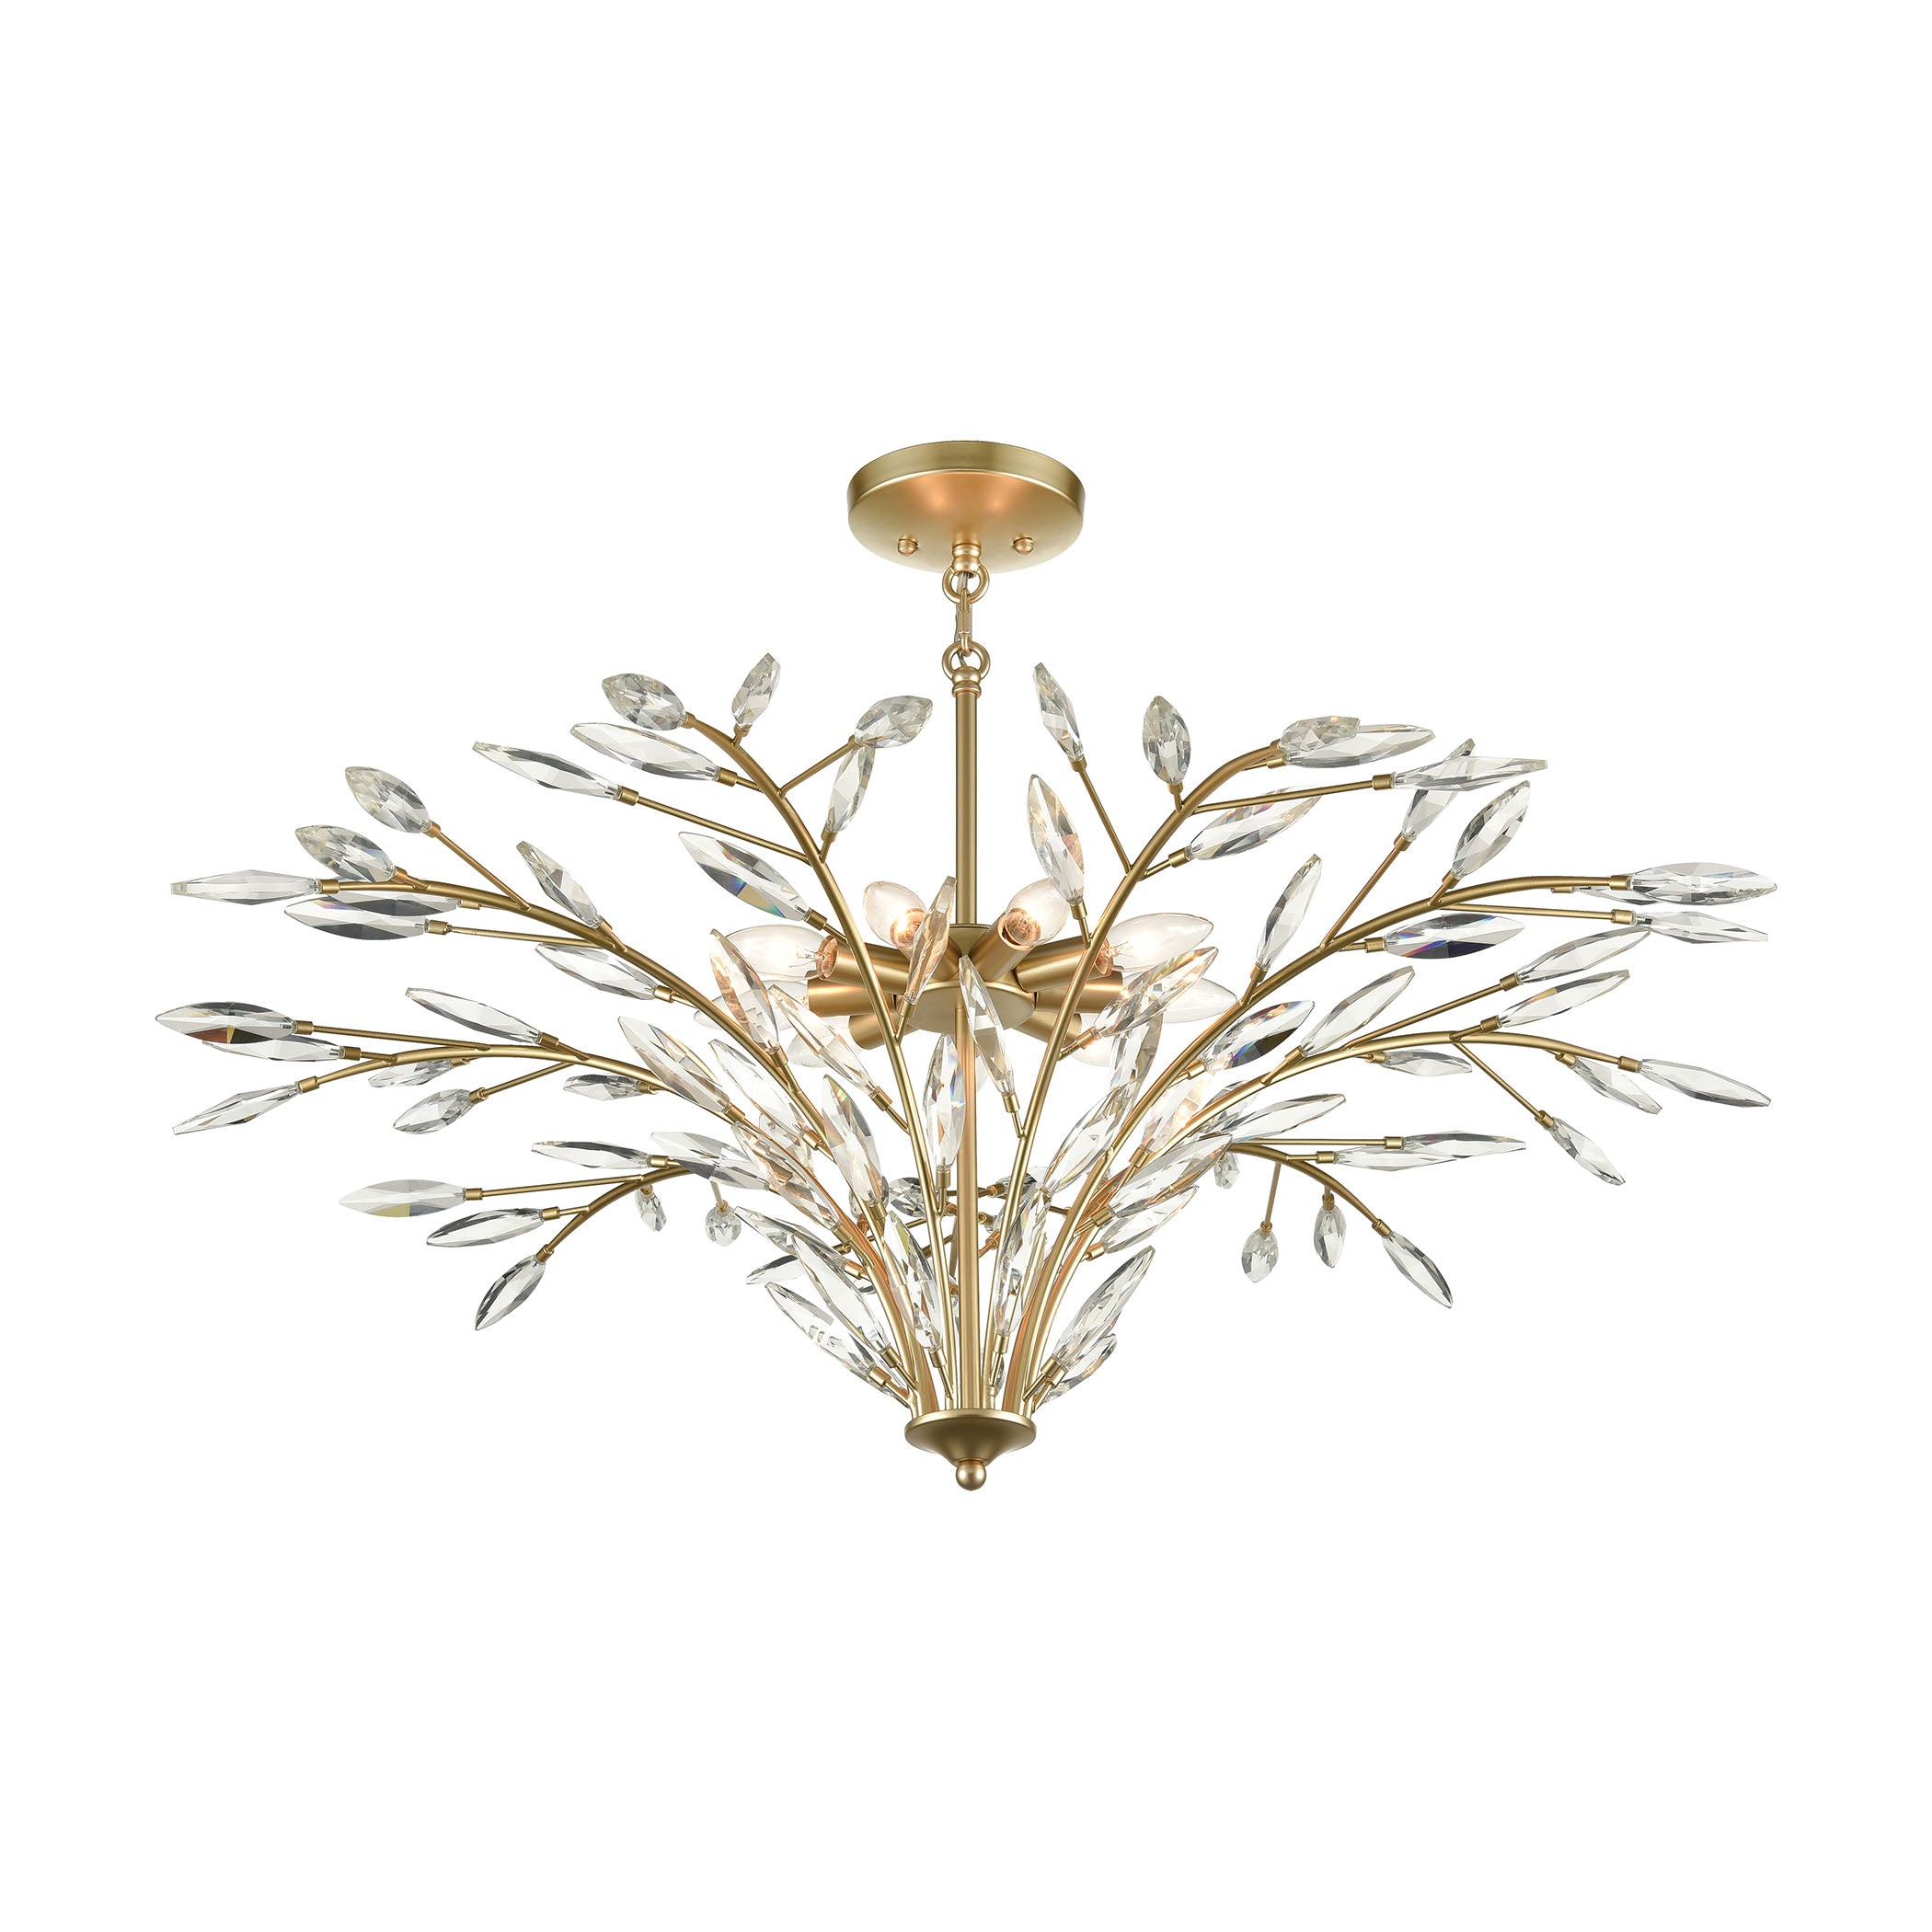 ELK Lighting 18296/9 Flora Grace 9-Light Chandelier in Champagne Gold with Clear Crystal